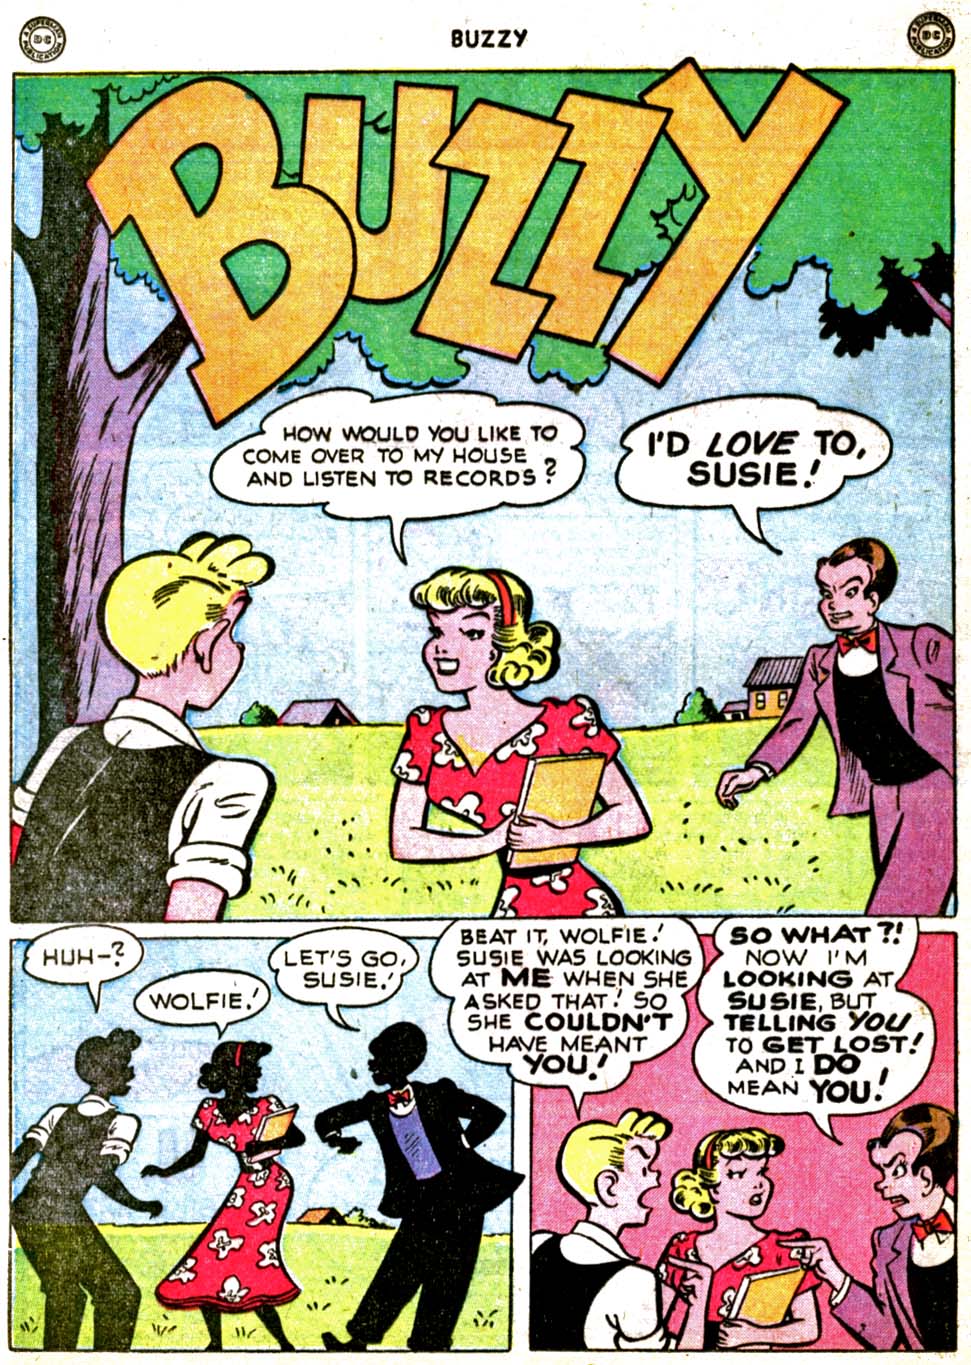 Read online Buzzy comic -  Issue #26 - 16